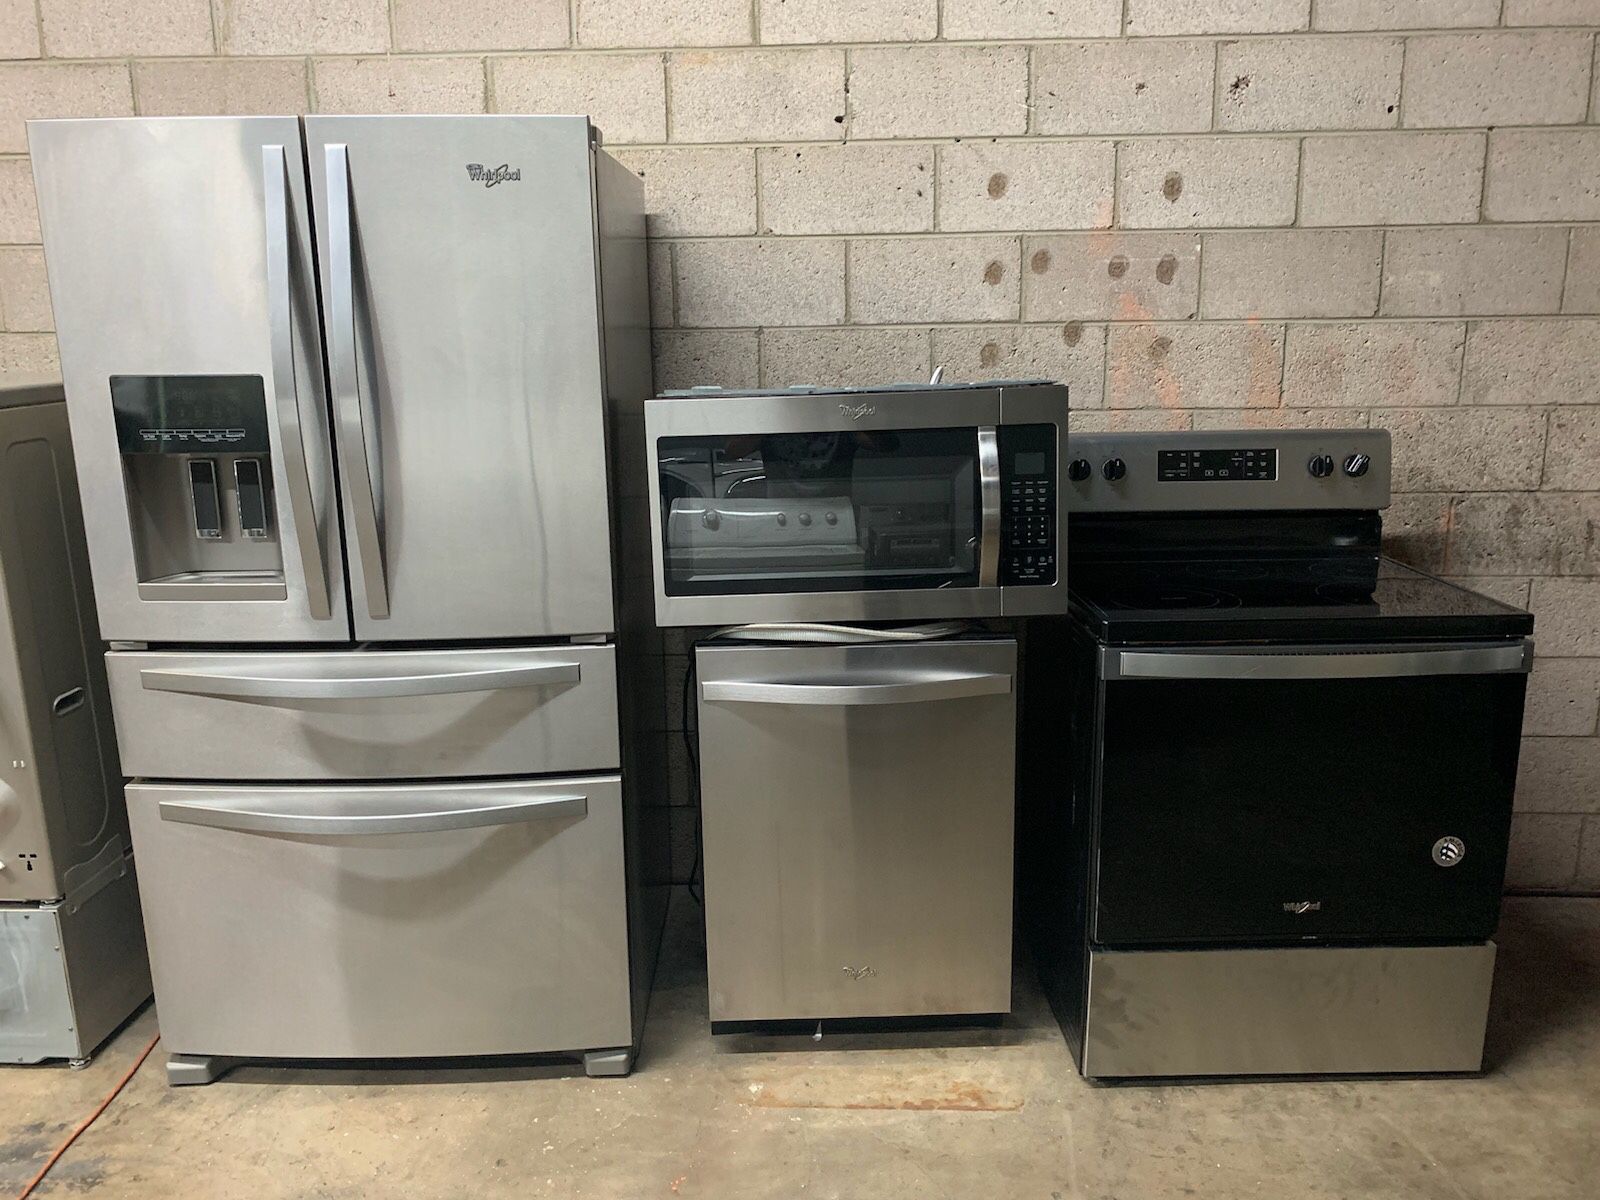 VERY NICE SET OF WHIRLPOOL STAINLESS STEEL KITCHEN APPLIANCES SET